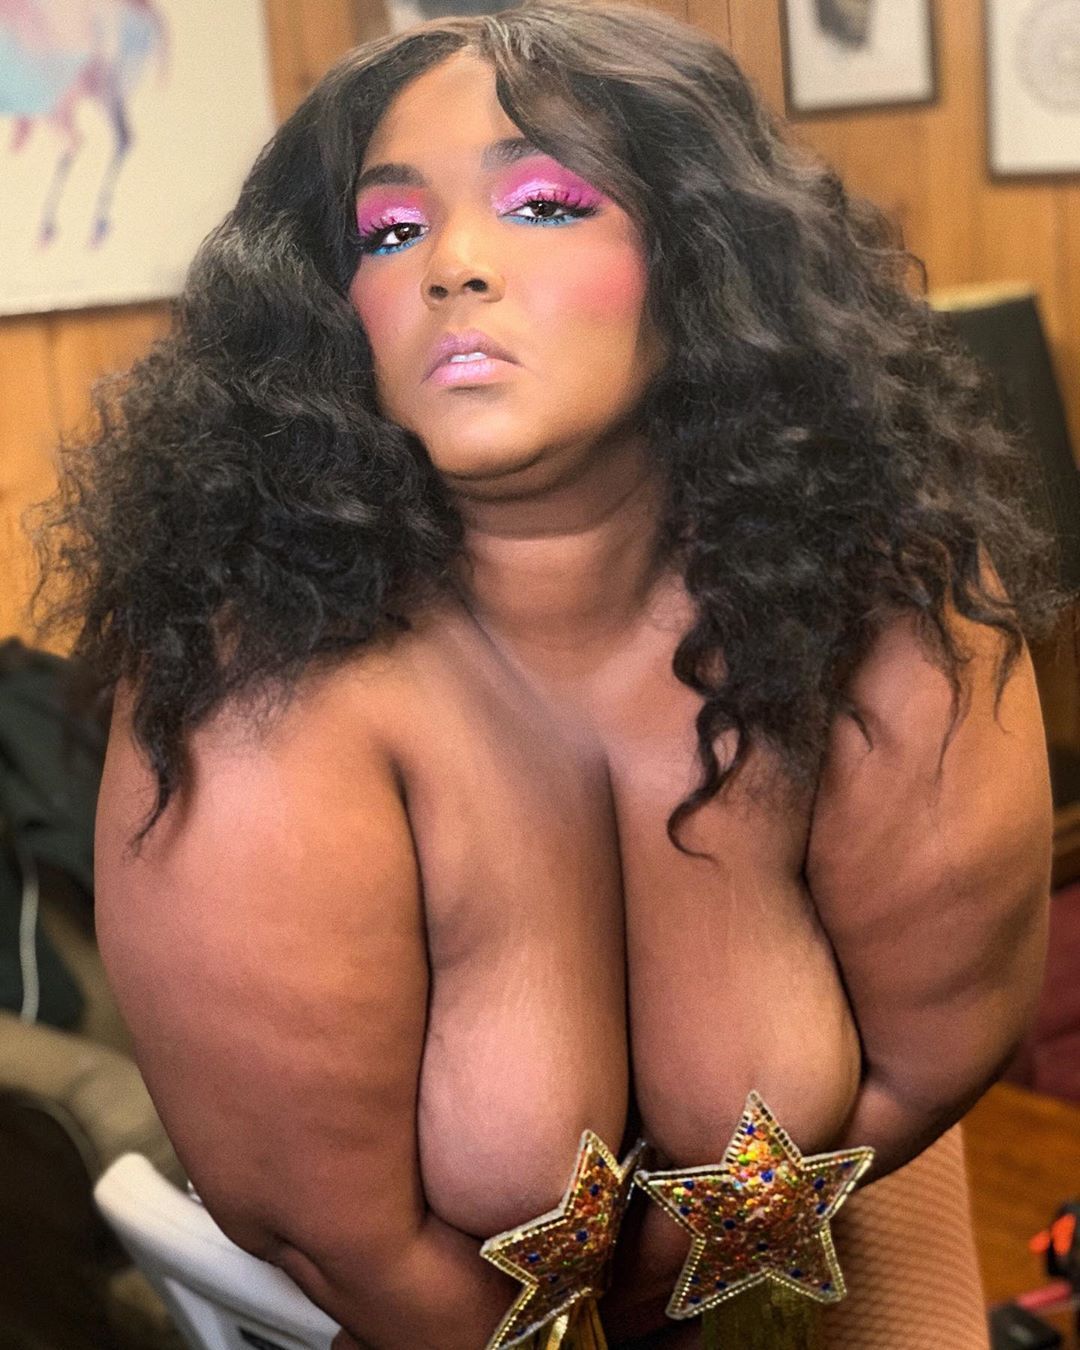 Lizzo's Surviving Activities That Cause Controversy On Social Media